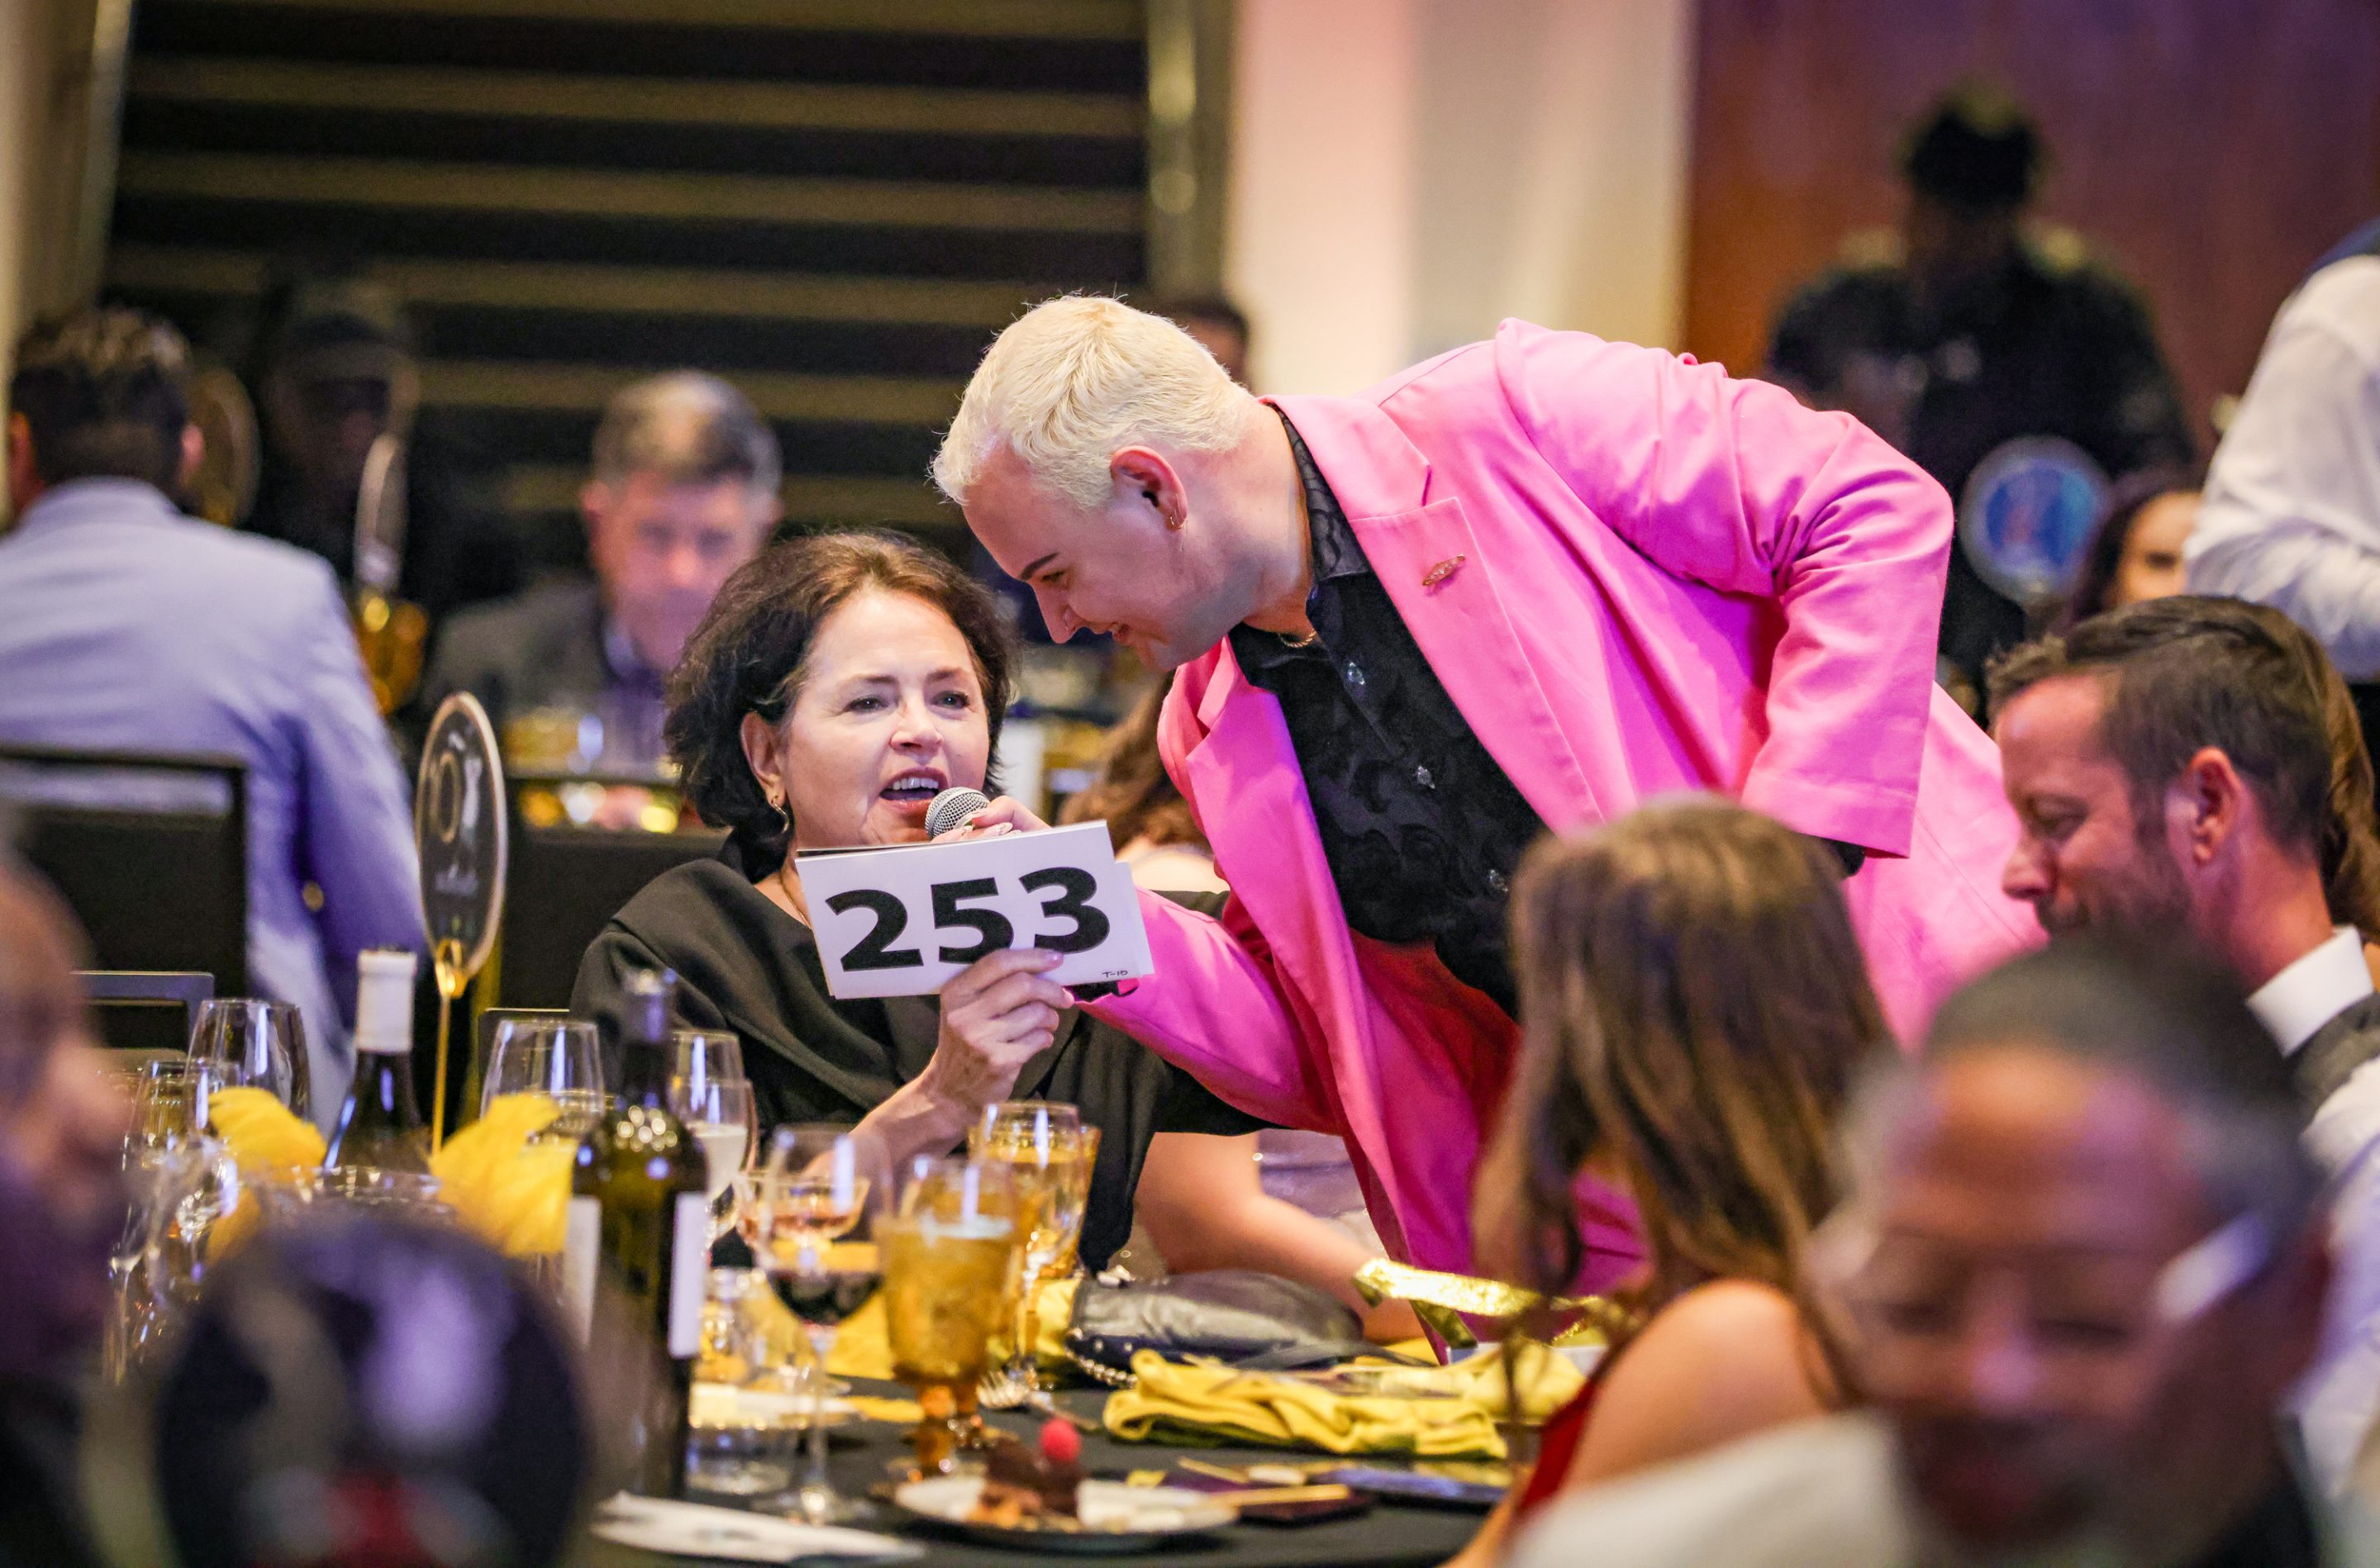 At a table, a man in a pink jacket and a woman interact.